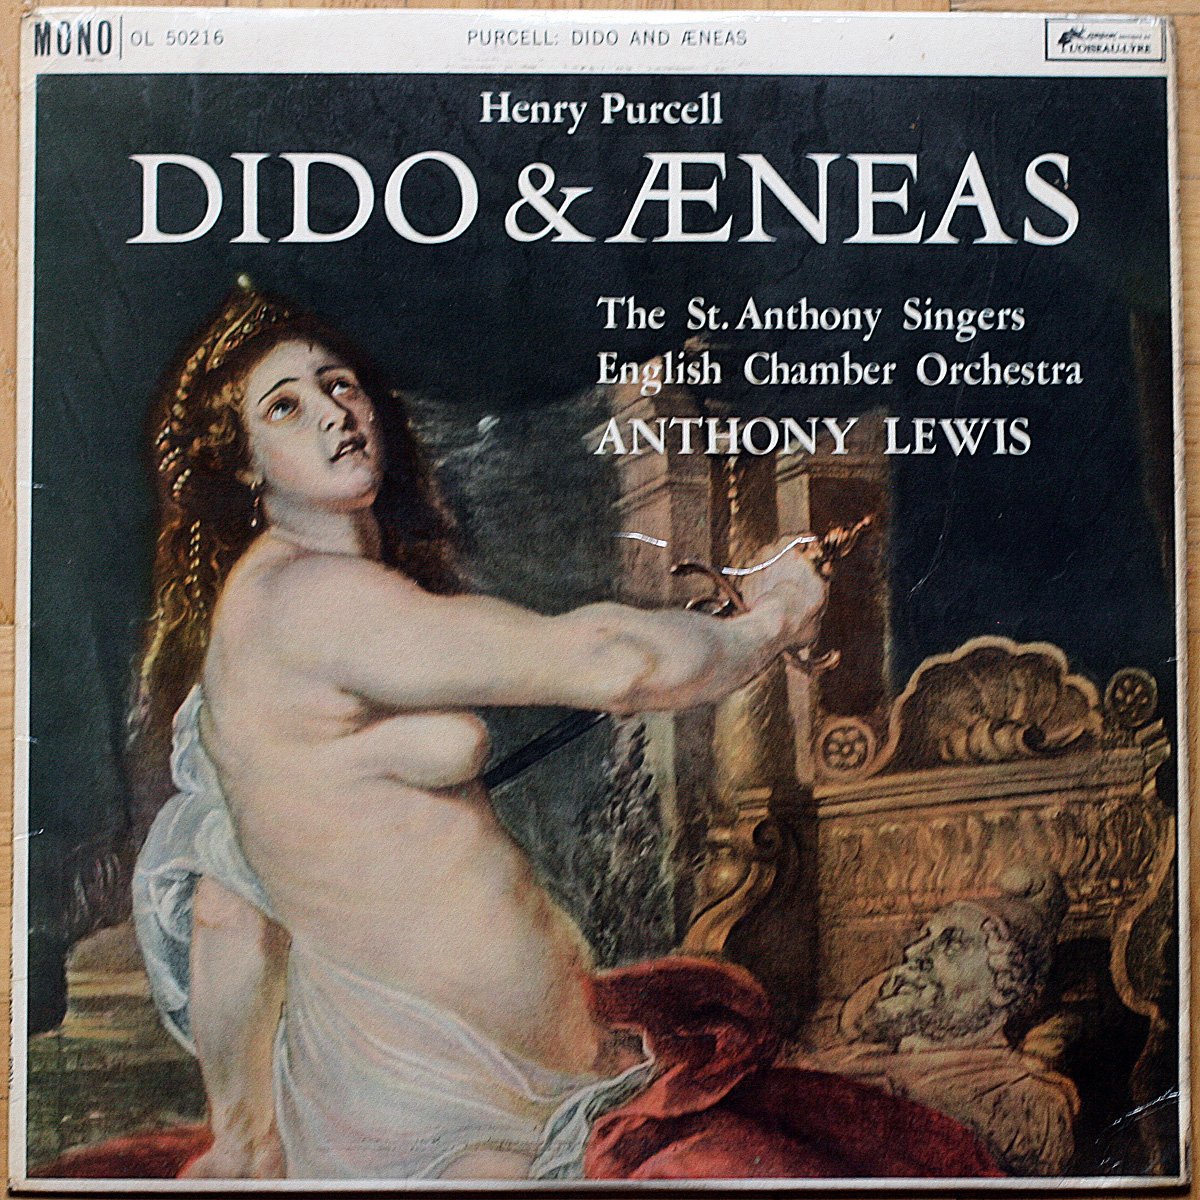 Purcell • Dido and Aeneas • London Records OL 50216 • Janet Baker • Patricia Clark • Raimund Herincx • The St. Anthony Singers • Anthony Lewis